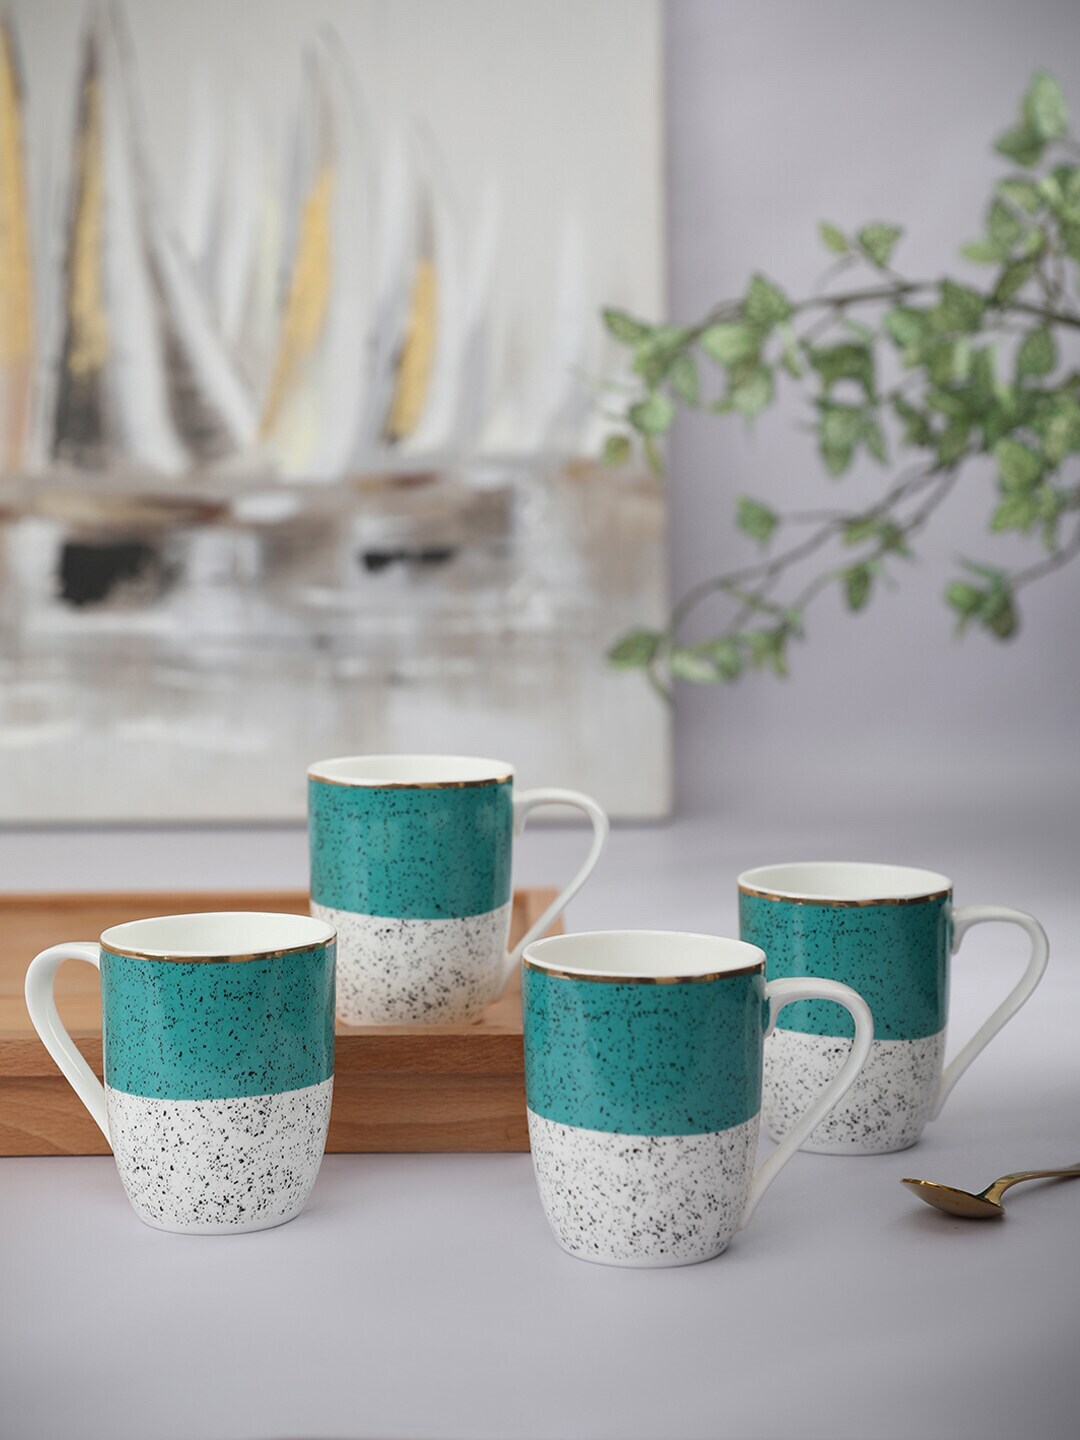 HomeTown White & Green Printed Ceramic Matte Cups Set of Cups and Mugs Price in India